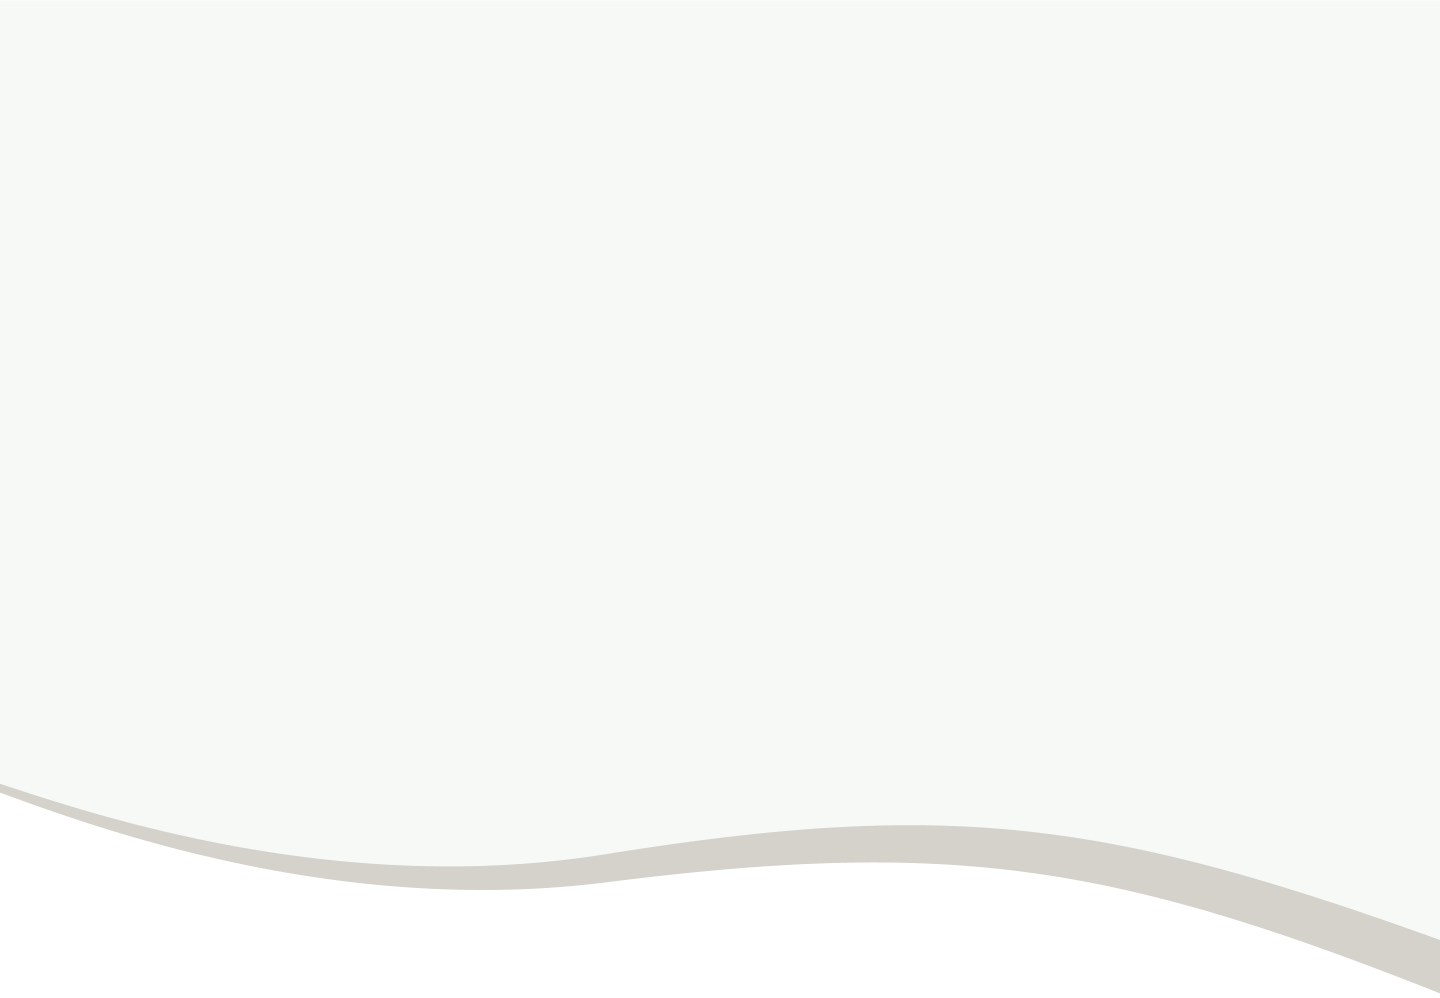 Image of a slope with a gradient